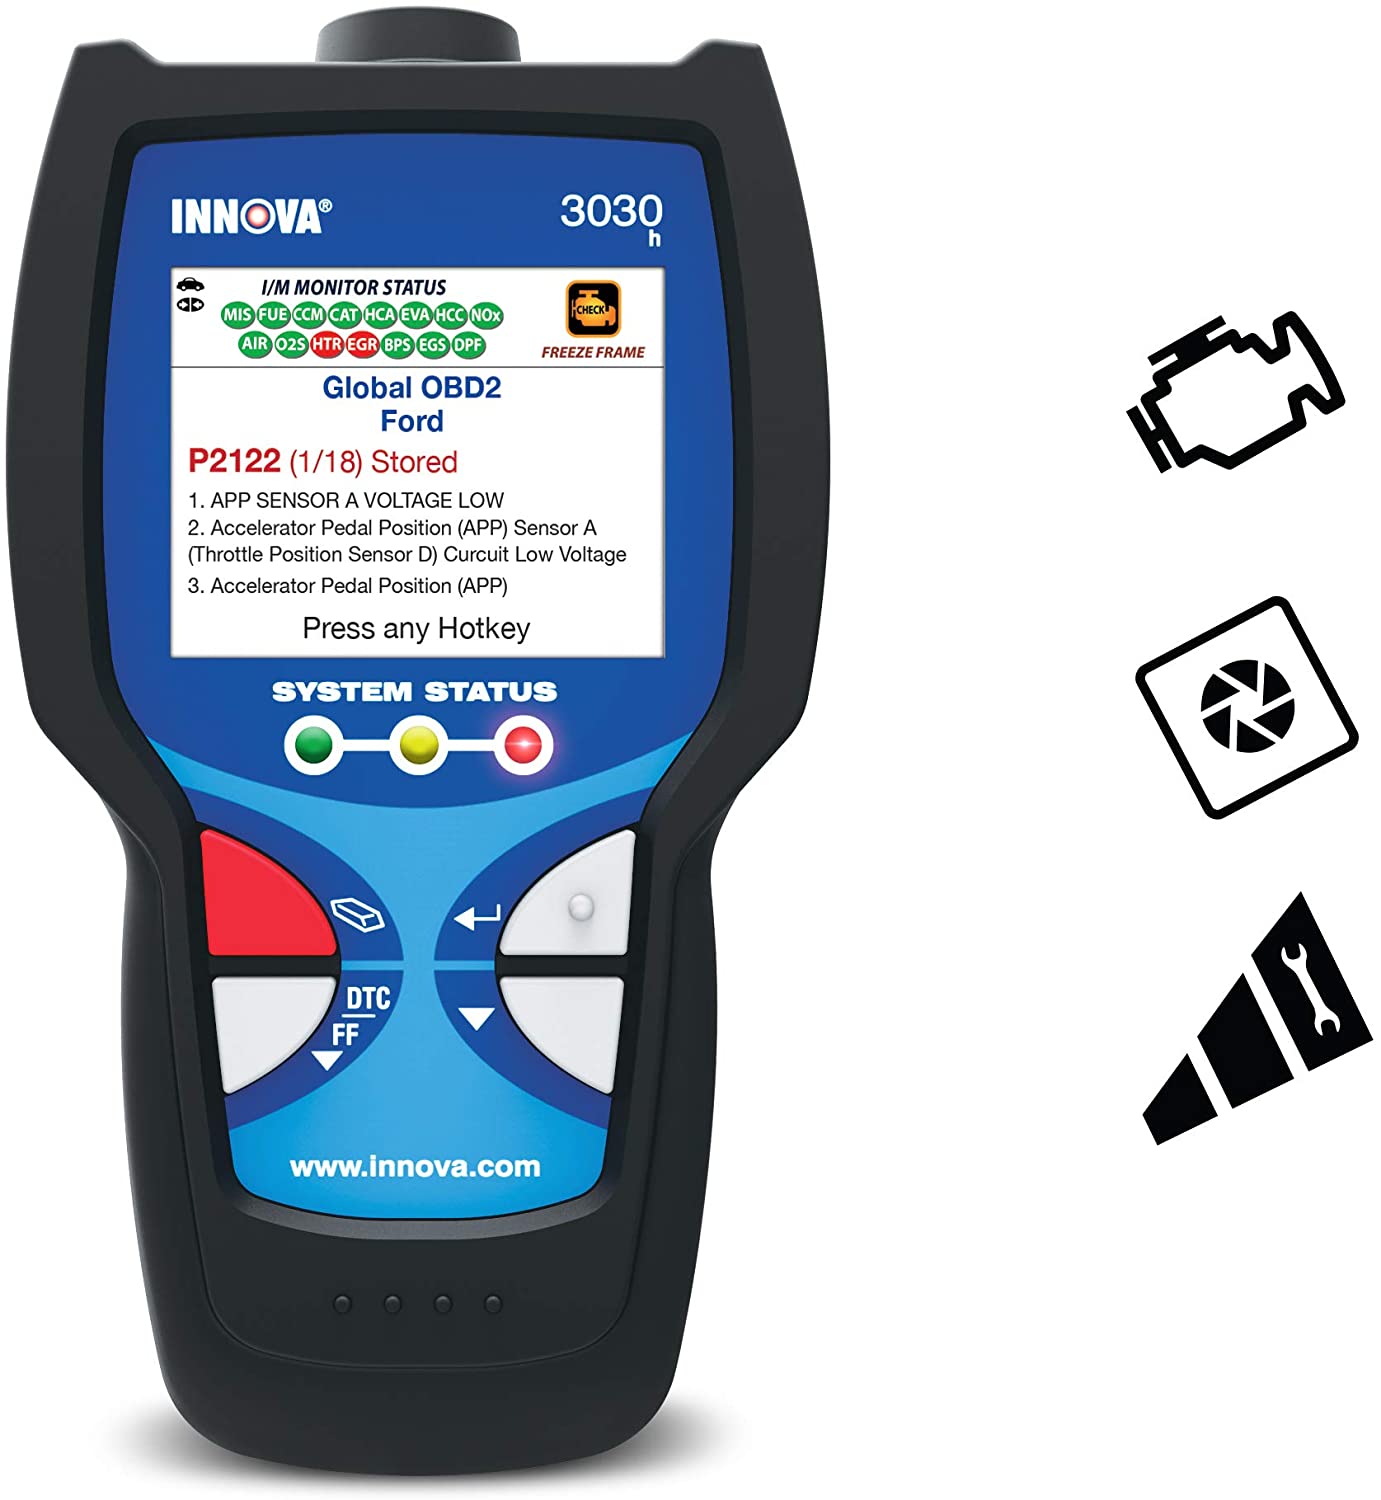 Innova 3030h OBD2 Scanner / Car Code Reader with Severity Alert and Emissions Check (Color Screen with DTC Severity)